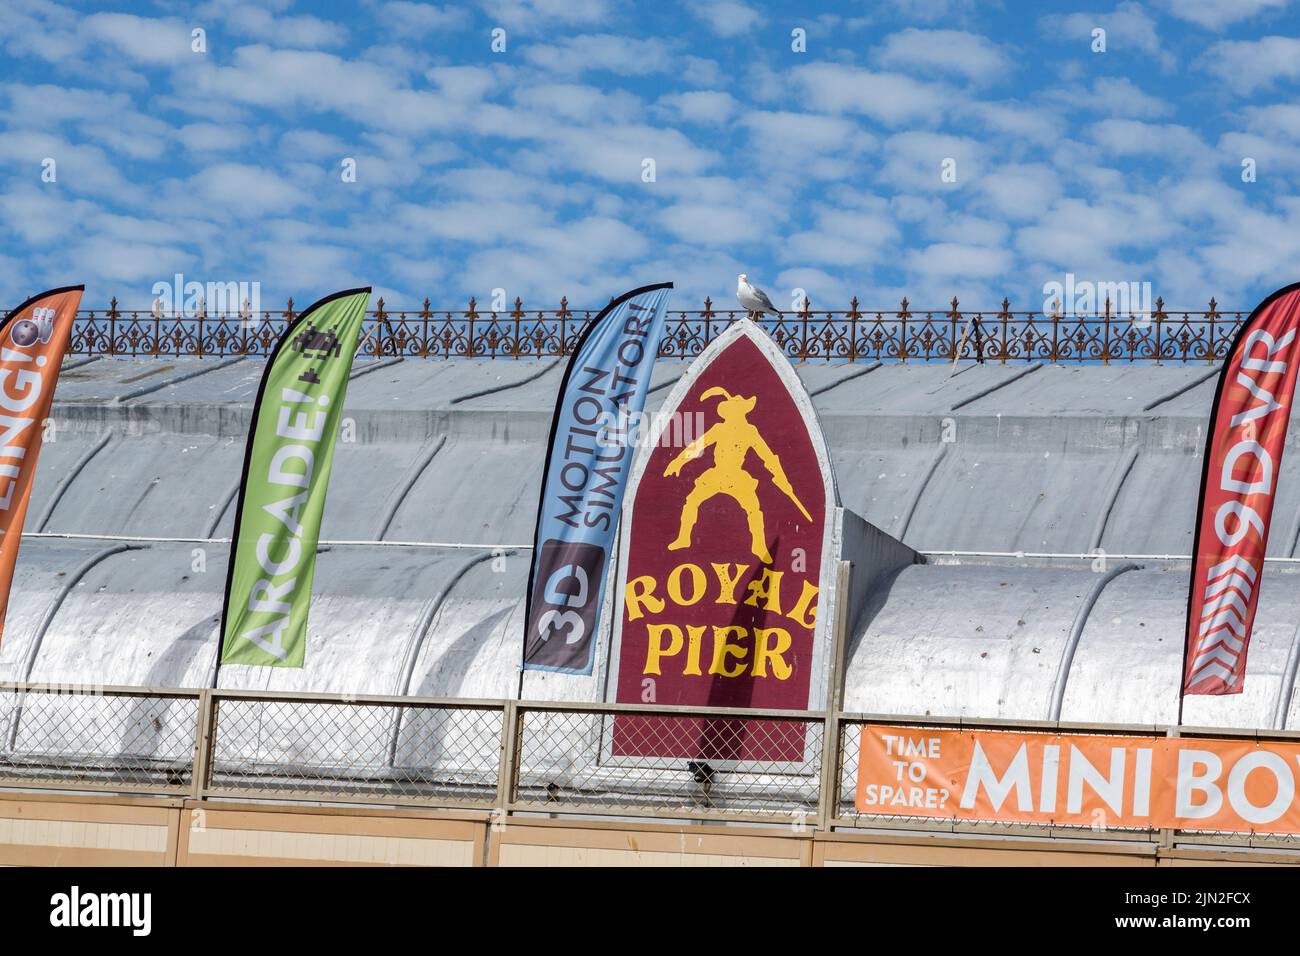 A section of roof on the Royal Pier, Aberystwyth, showing various banners and ornate ironwork. A seagull stands on the Royal Pier emblem. Stock Photo